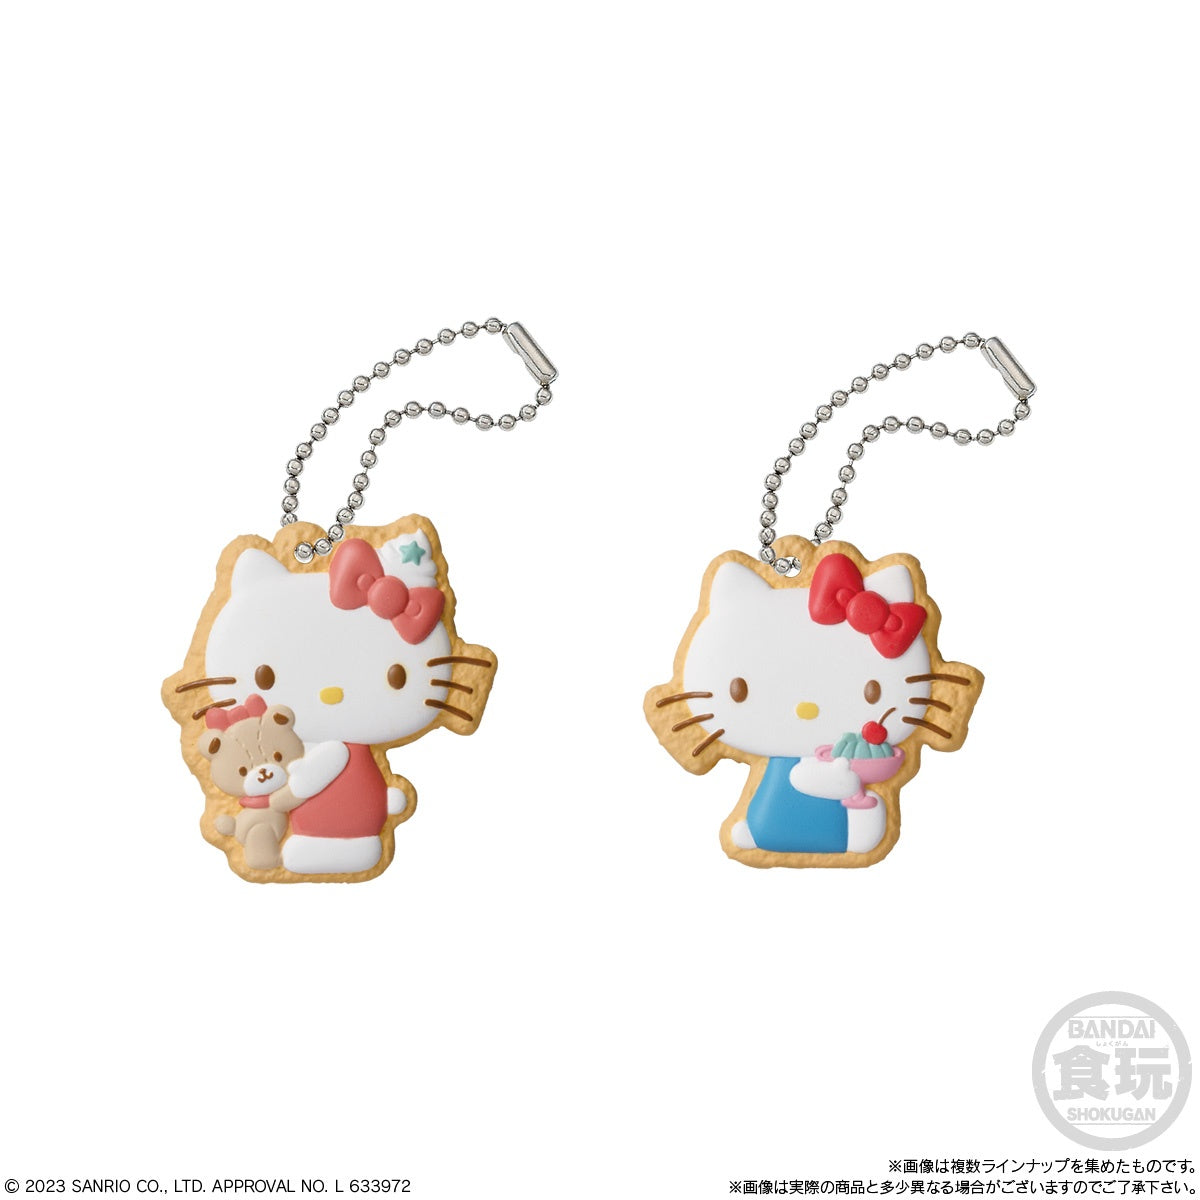 Sanrio Characters Cookie Charmcot Blind Box (Single Unit)